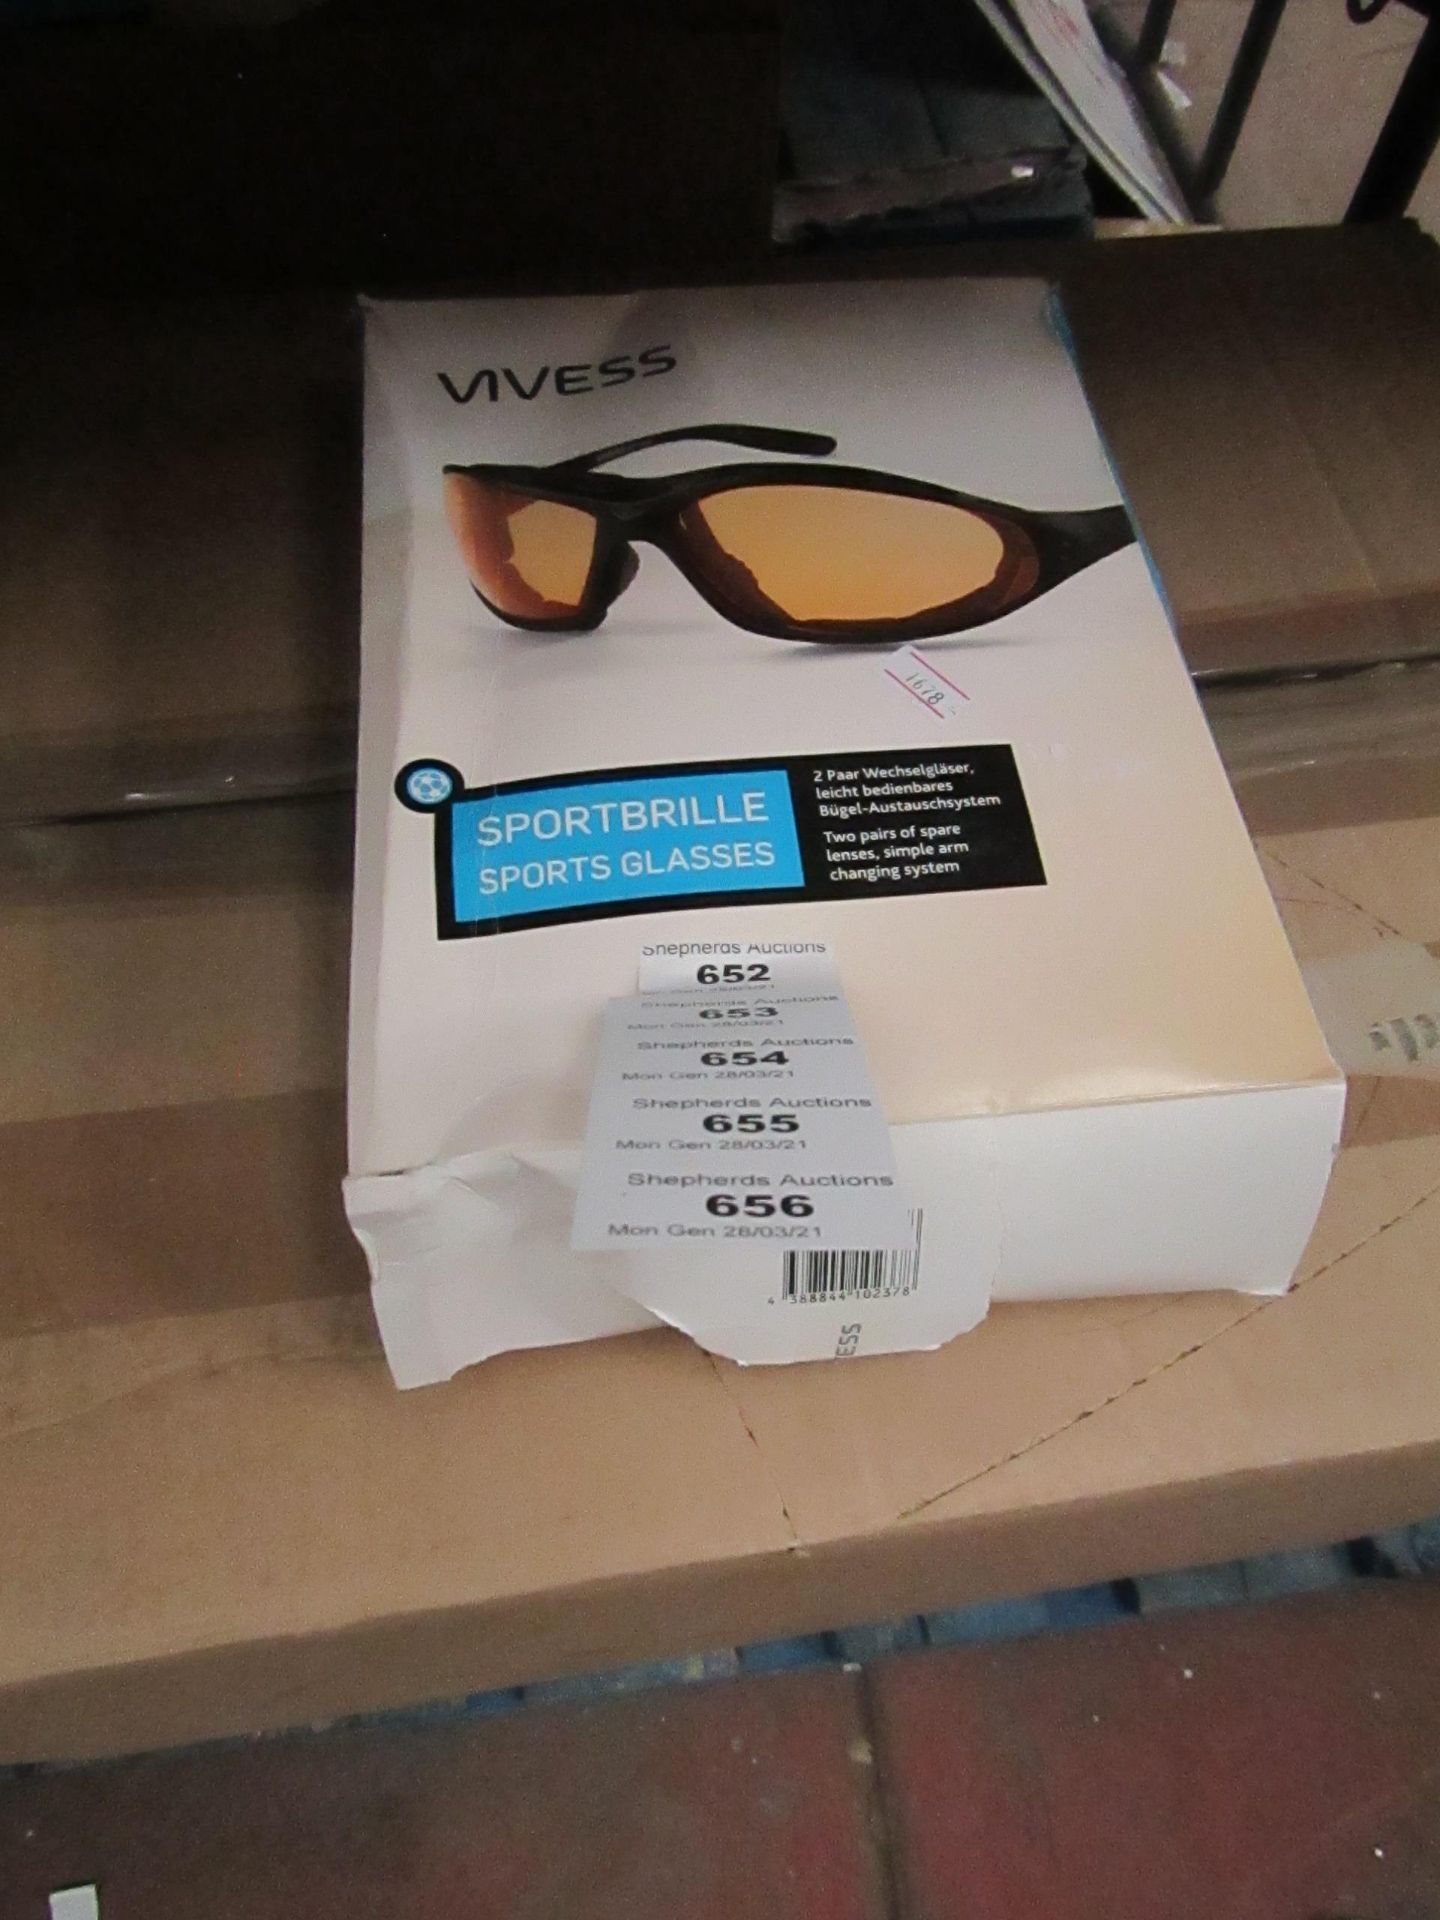 5x Vivess SportBrille Sports Glasses - New & Boxed (but may have damaged packaging)